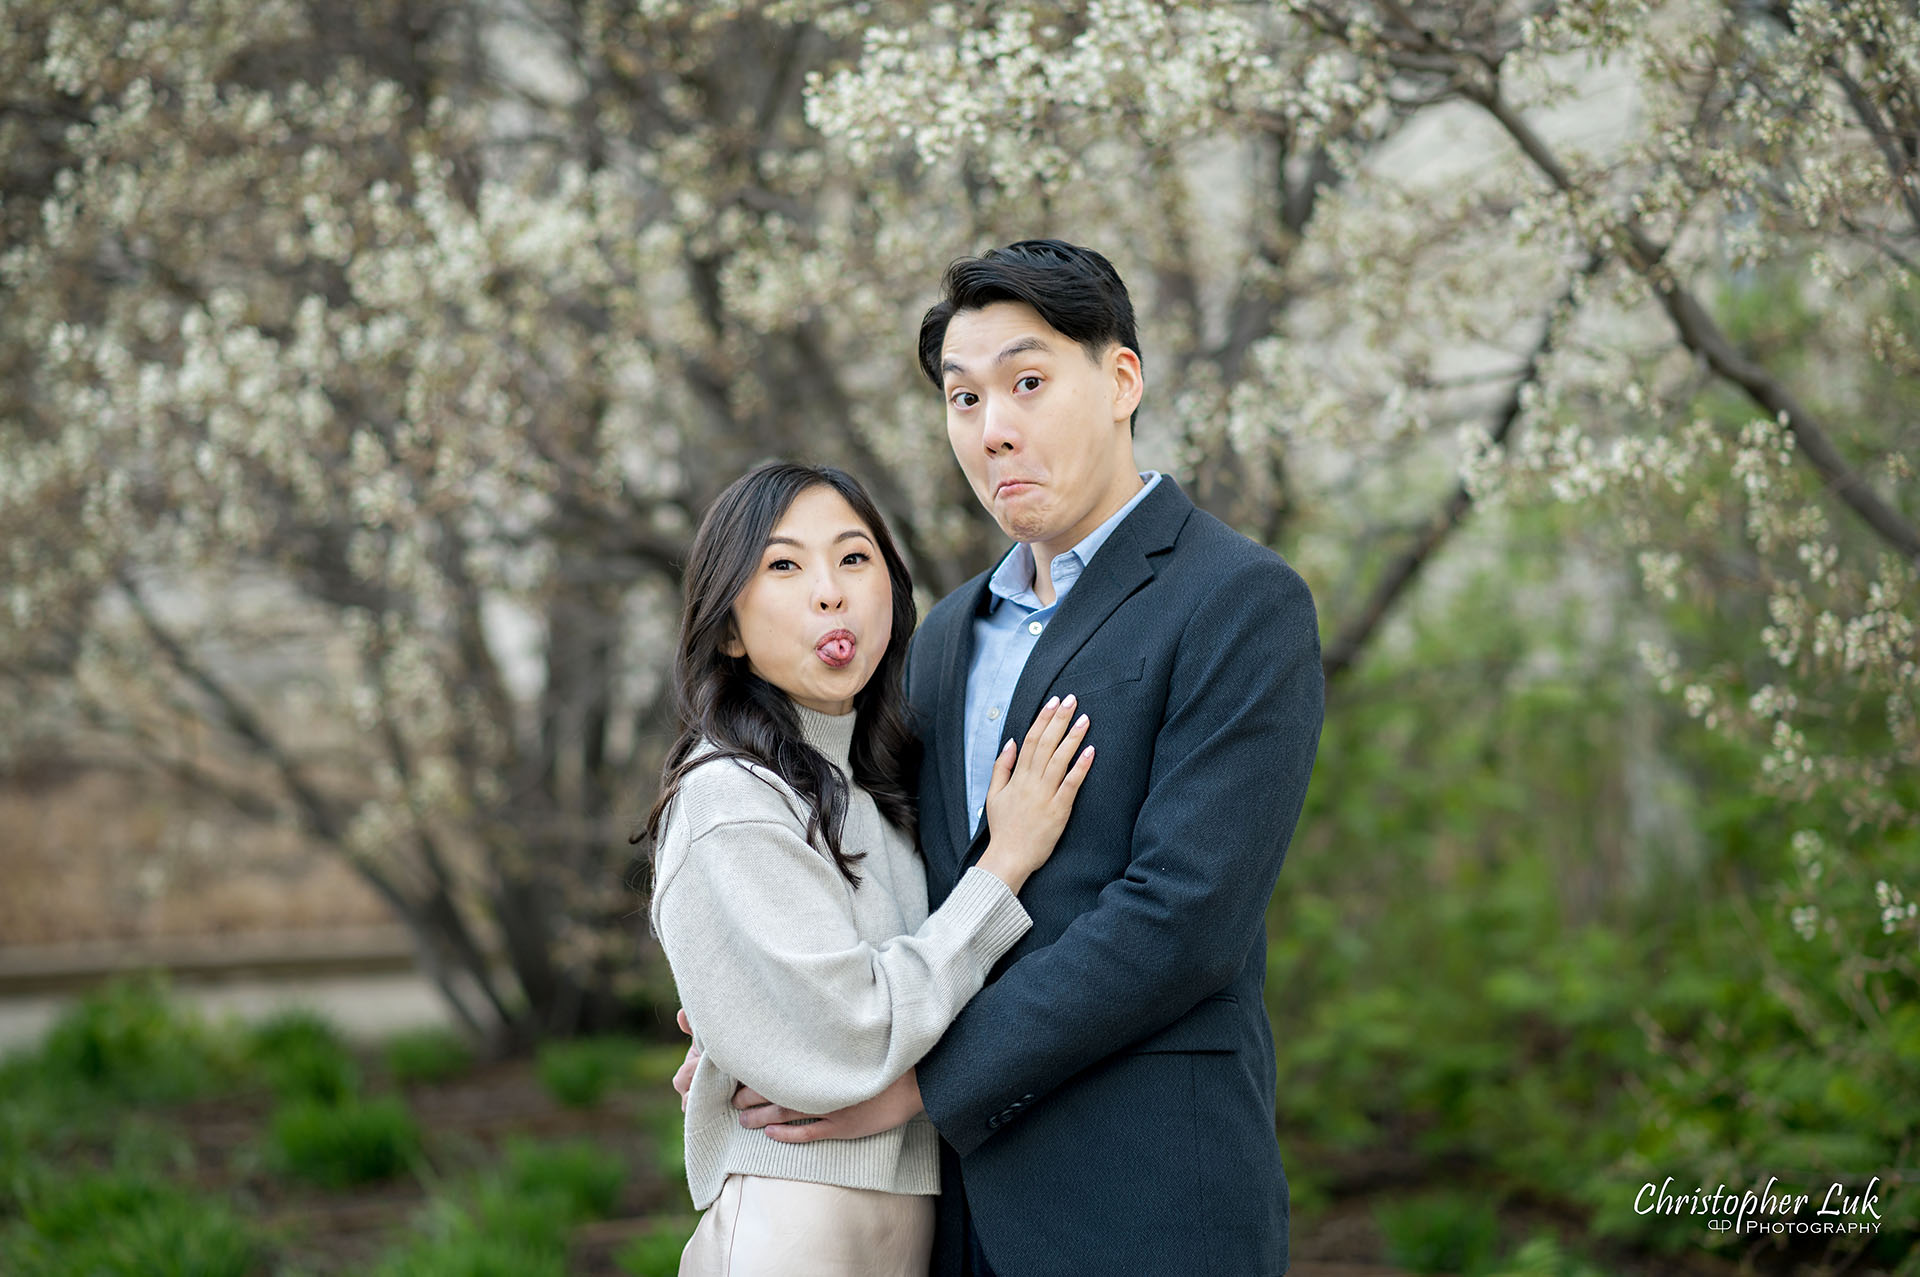 Bride Groom Spring Blossoms Engagement Pictures Smile Candid Natural Organic Photojournalistic Funny Faces Silly 